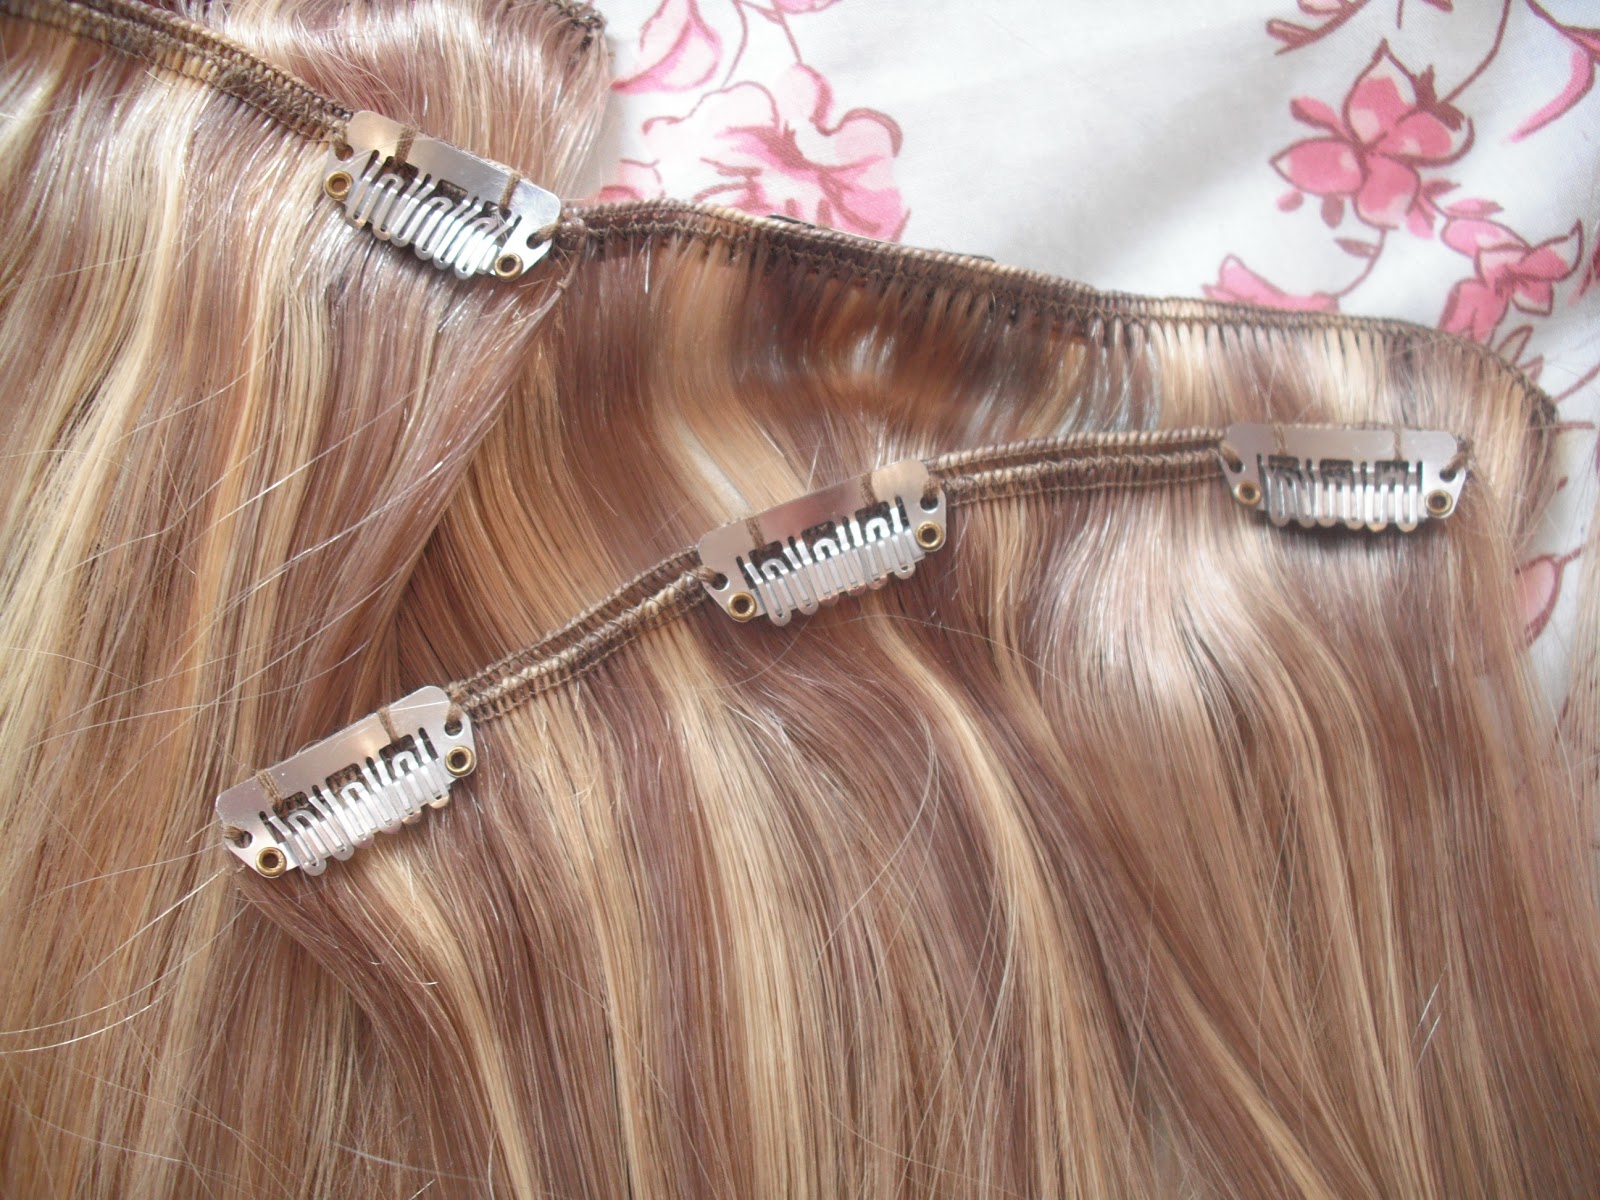 Blue Clip-In Hair Extensions for Short Hair - wide 2